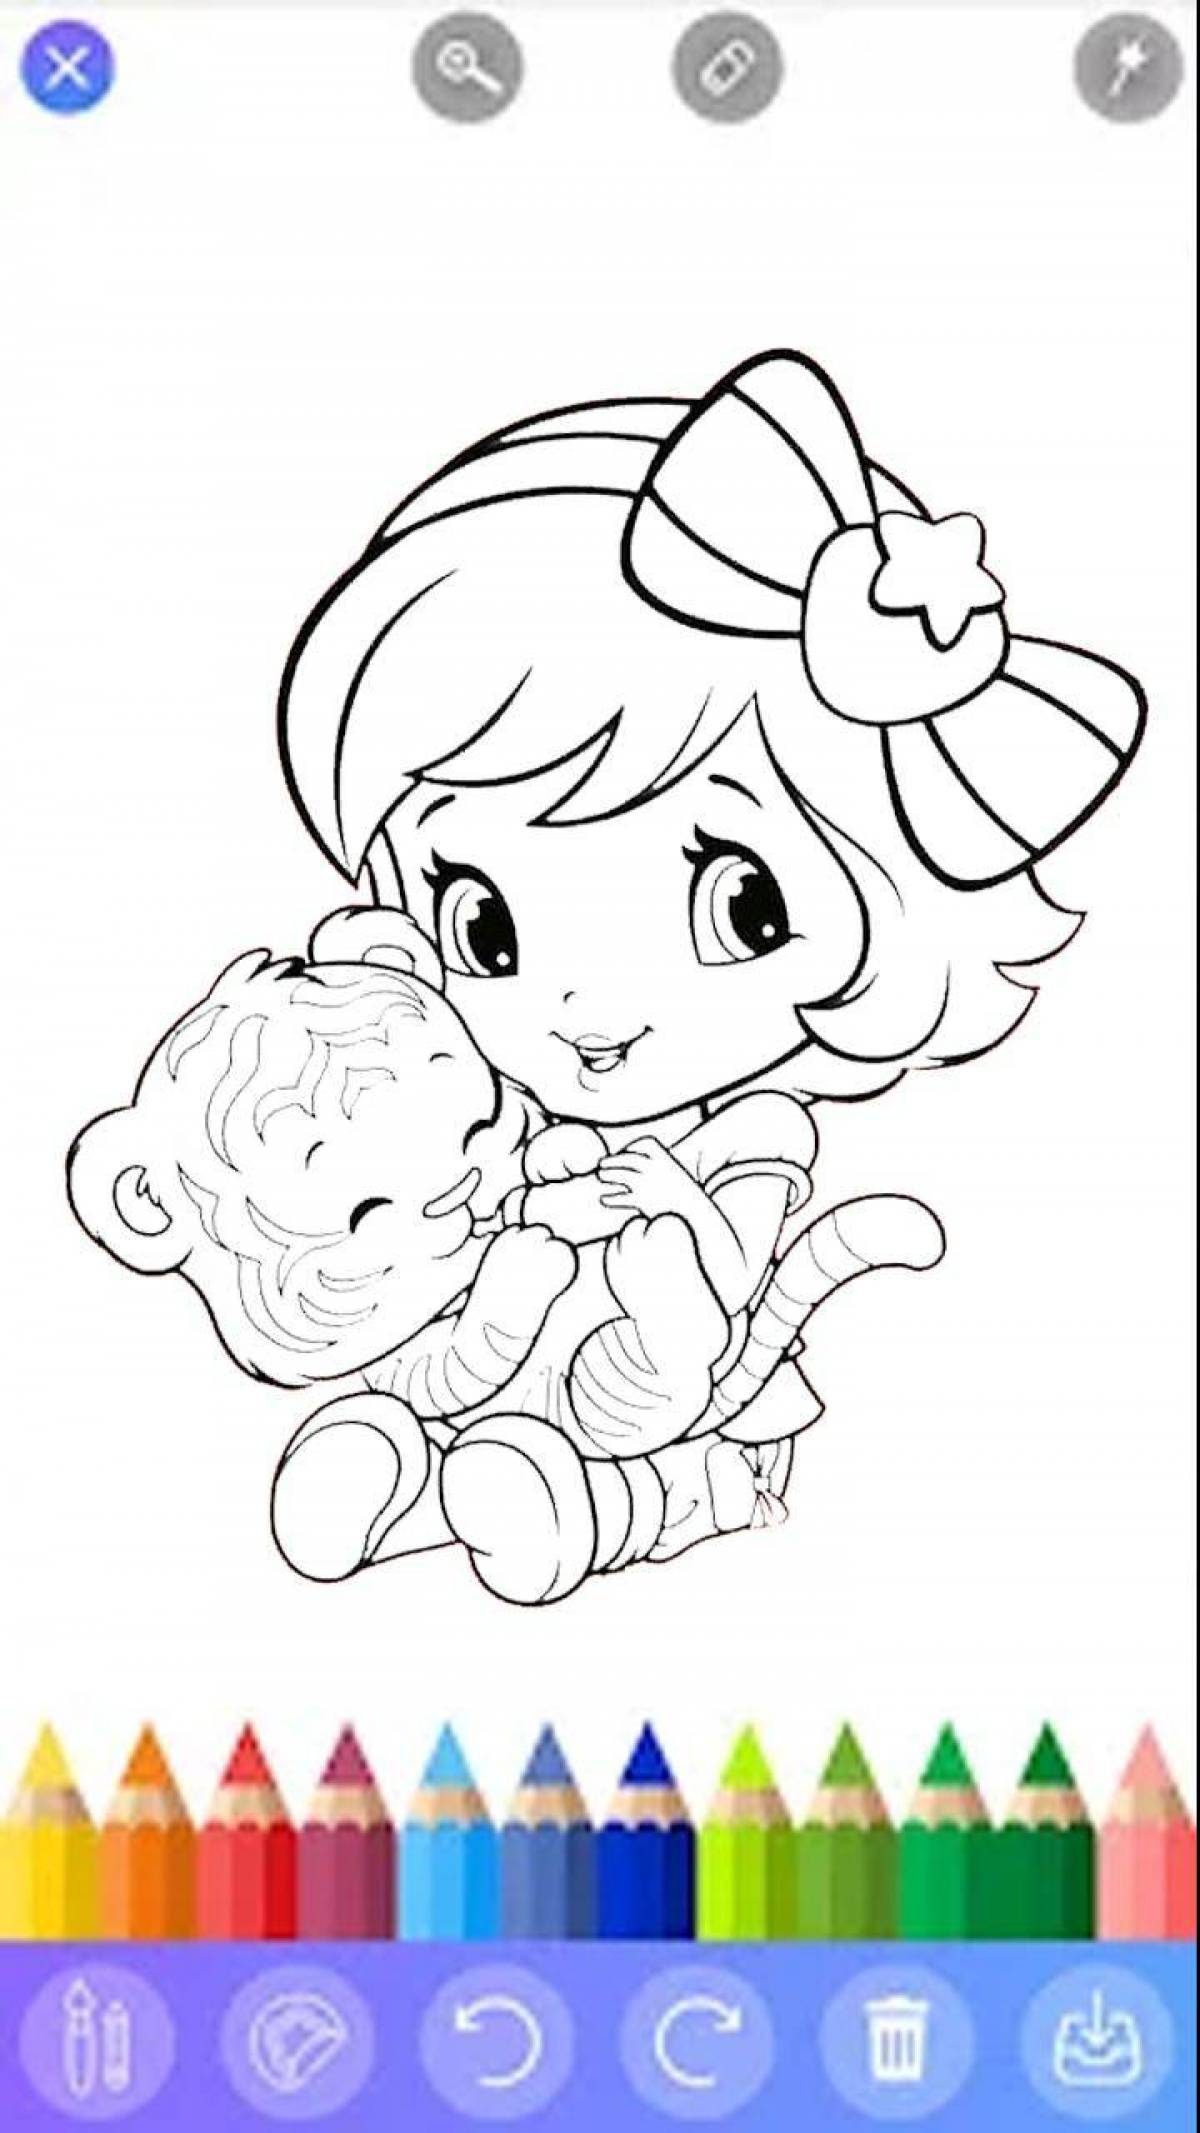 Refreshing coloring book for girls, small